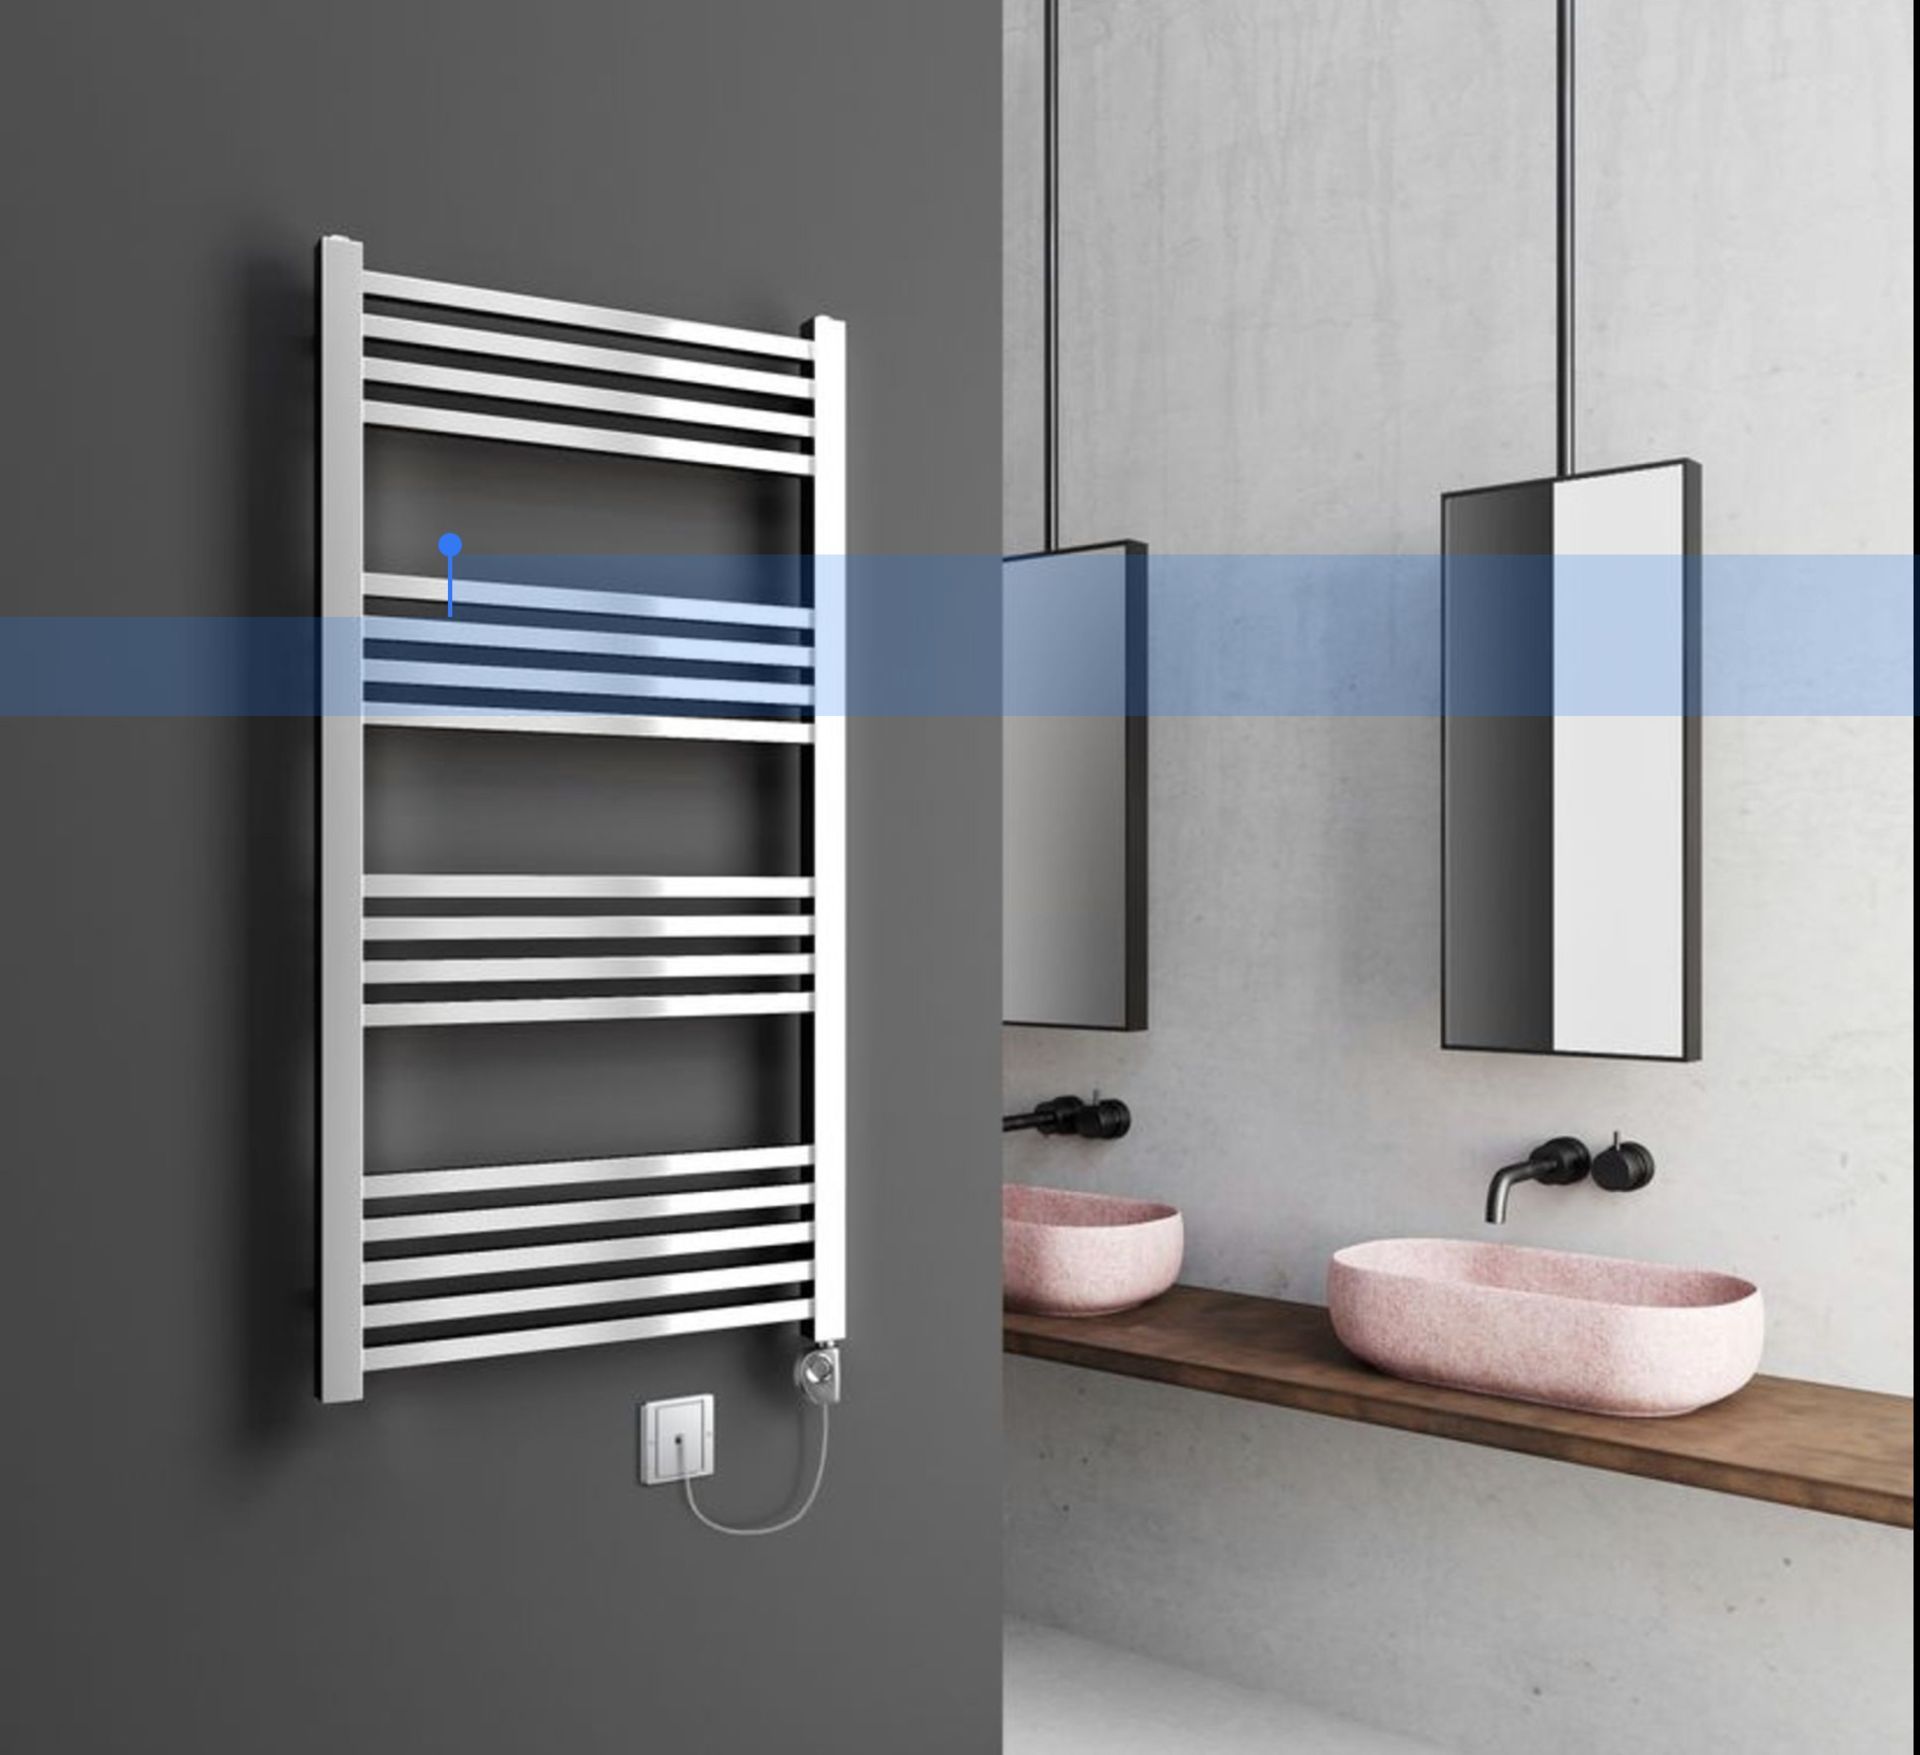 New & Boxed Porcelanosa Noken 1100x500mm Electric Towel Radiator With Fixings And Heating Eleme...